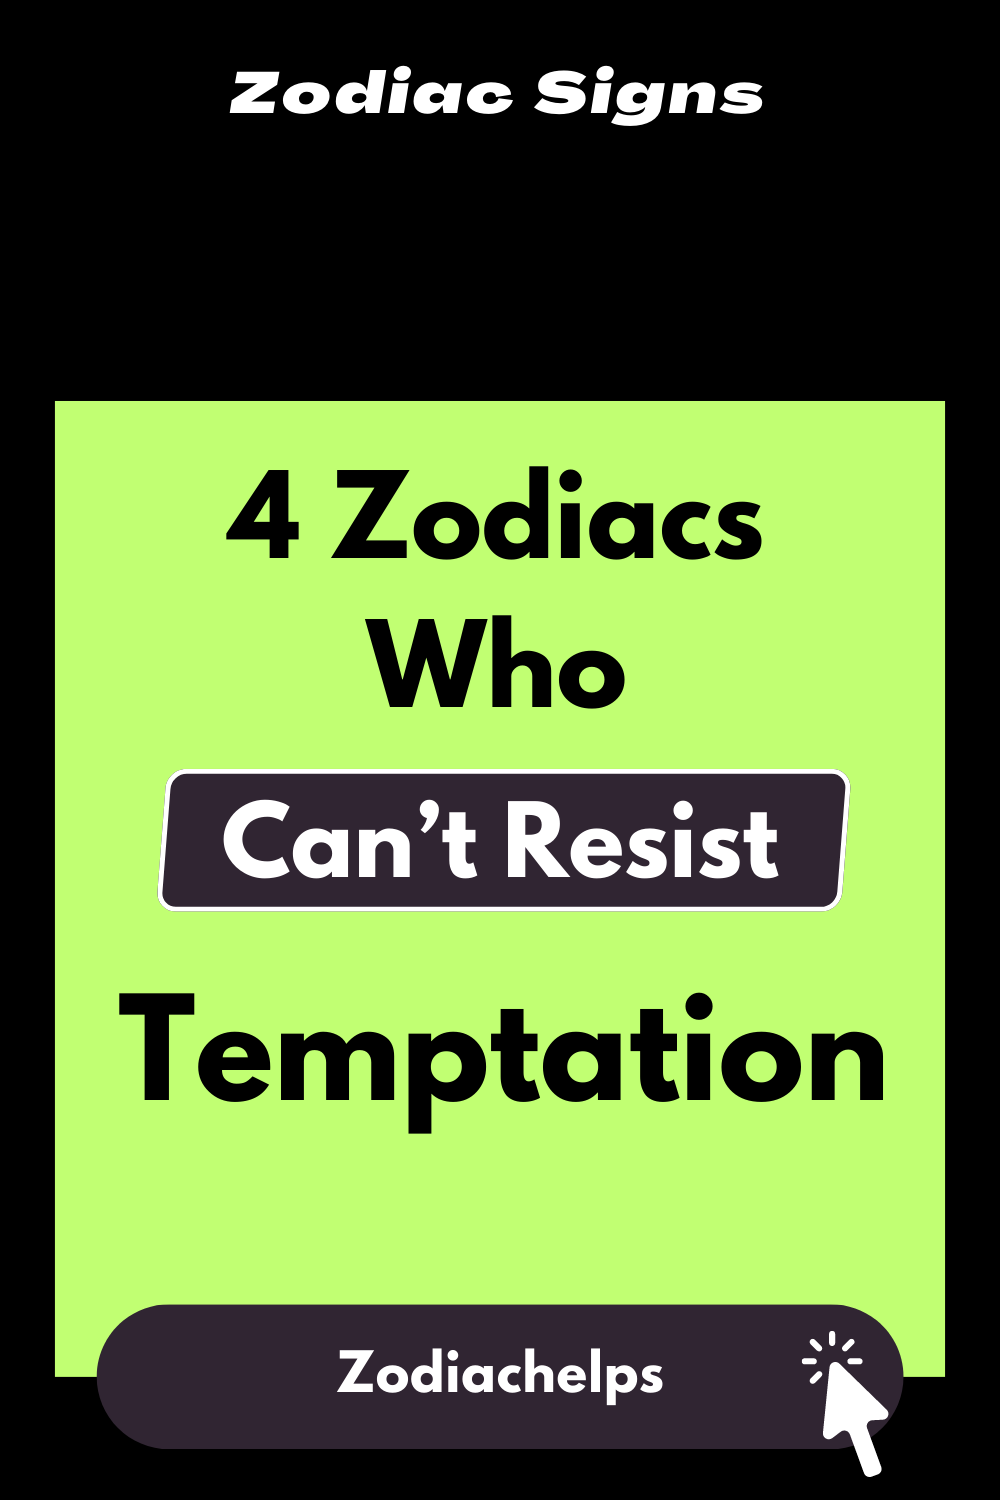 4 Zodiacs Who Can’t Resist Temptation